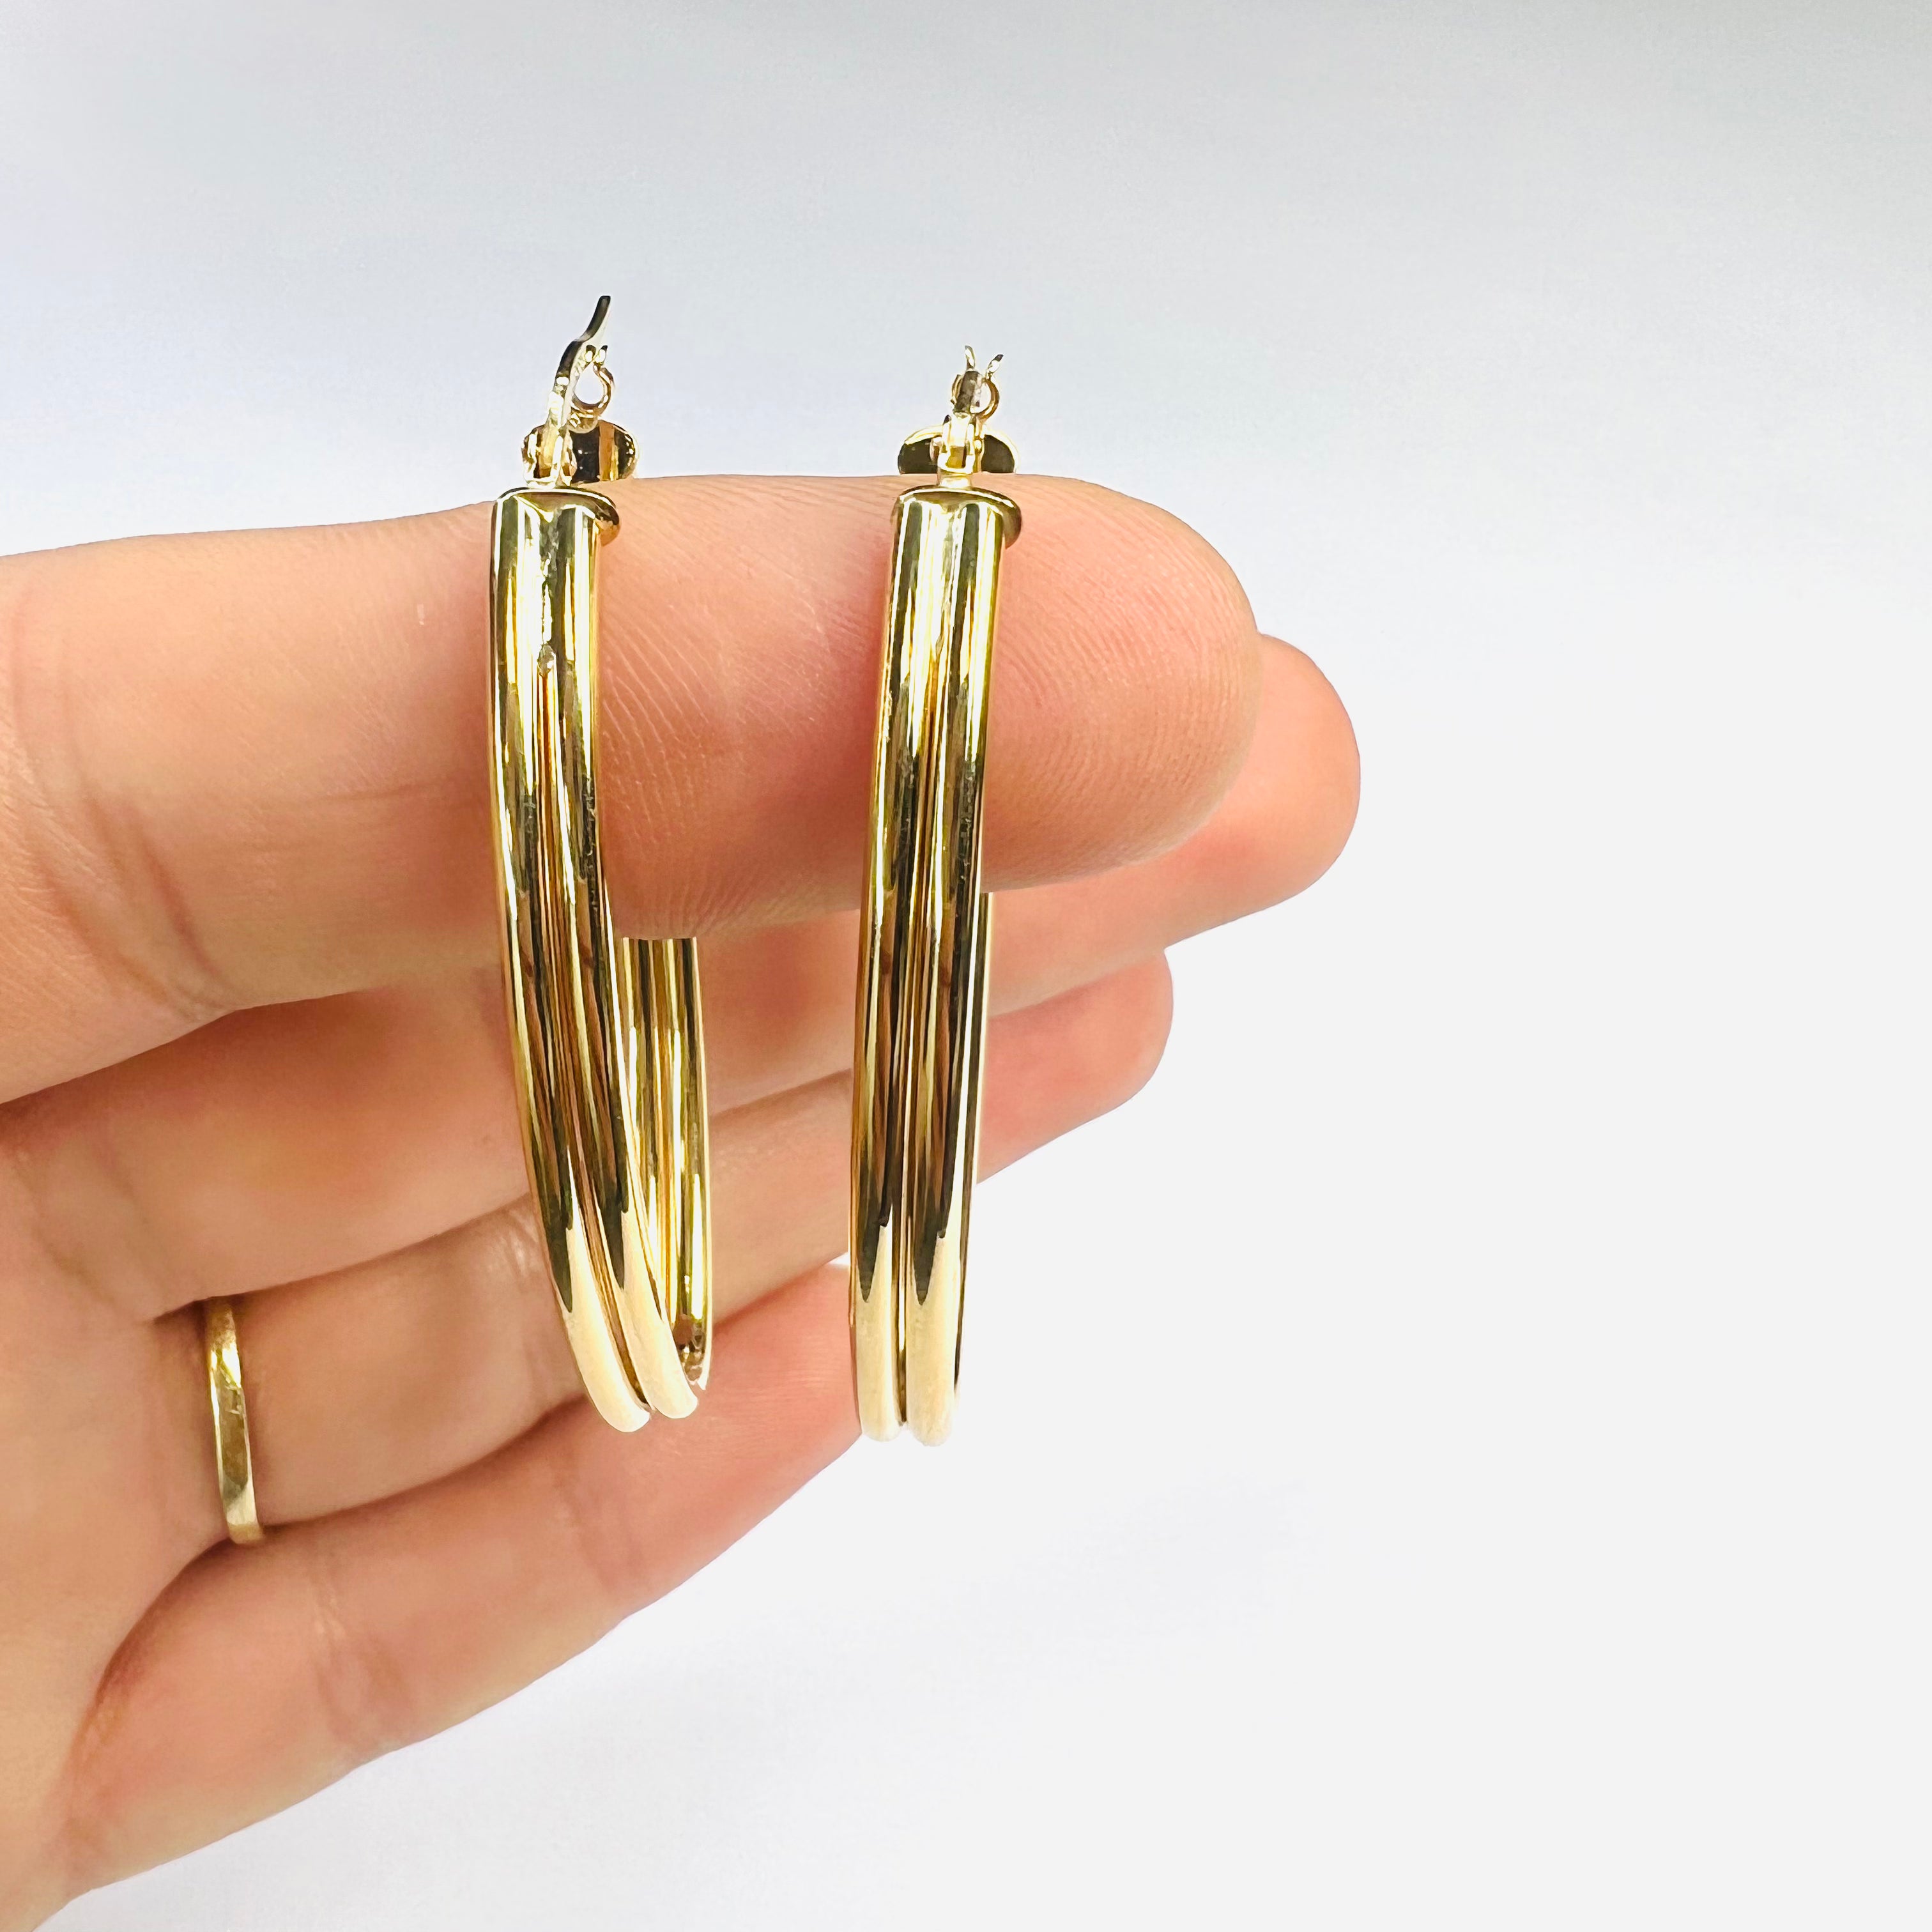 Beautiful New 14K Solid Yellow Gold Double Marquise Hoop Earrings 1.75"x.90"